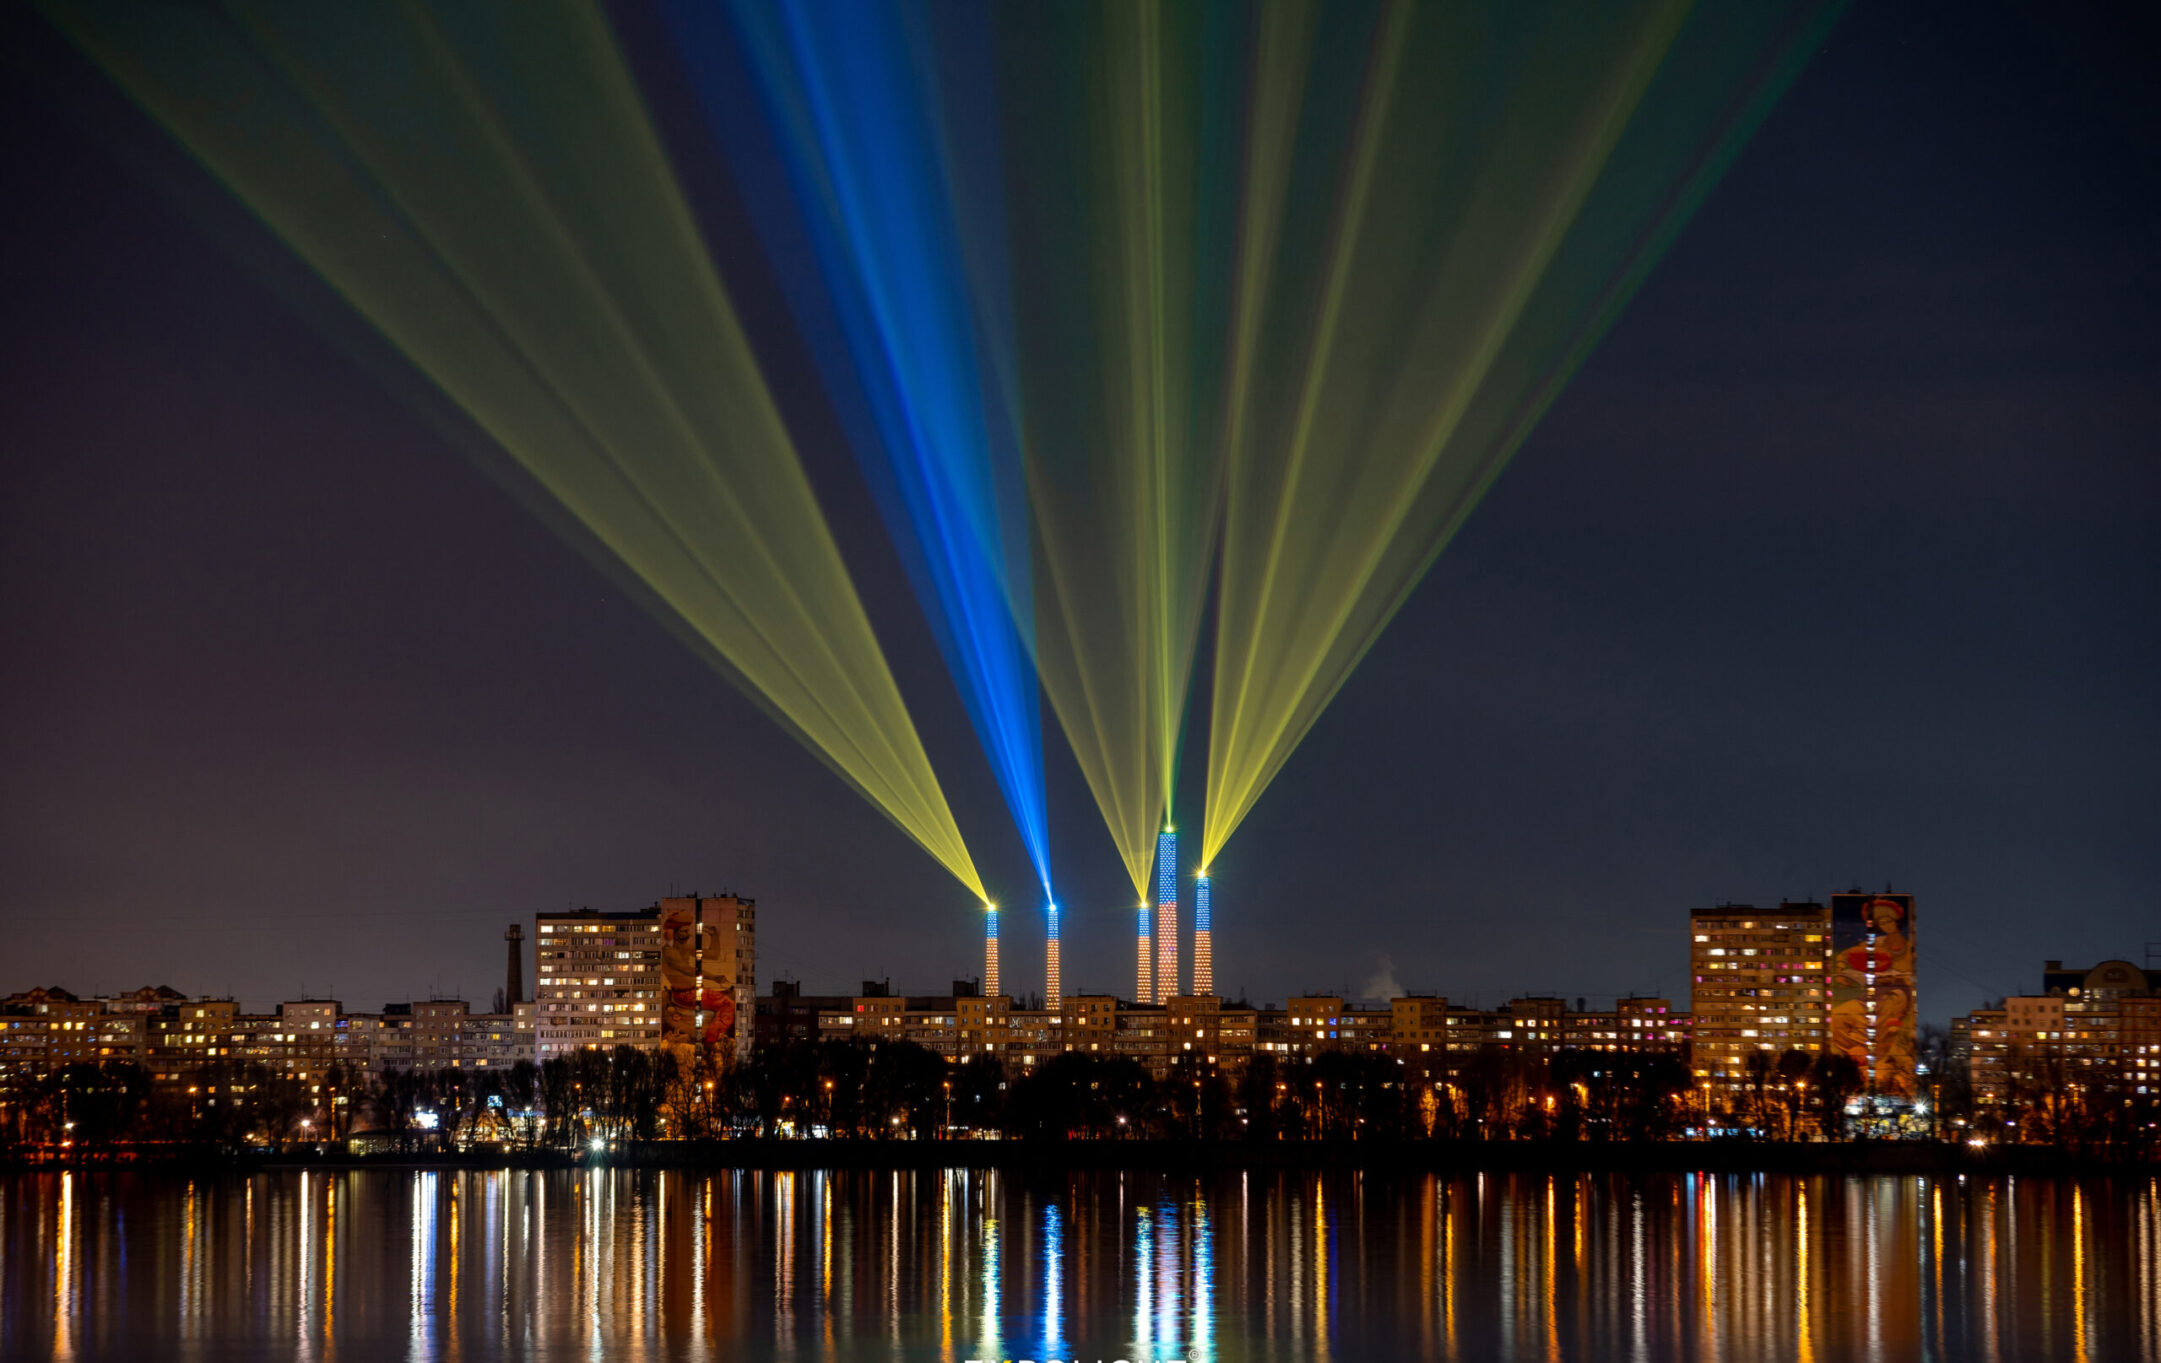 The skyline of Dnipro was lit up with lasers for Ukraine’s Day of Unity, Feb. 16, 2022. Russian forces invaded the country just over a week later. (Mykola Miakshykov/ Ukrinform/Future Publishing via Getty Images)